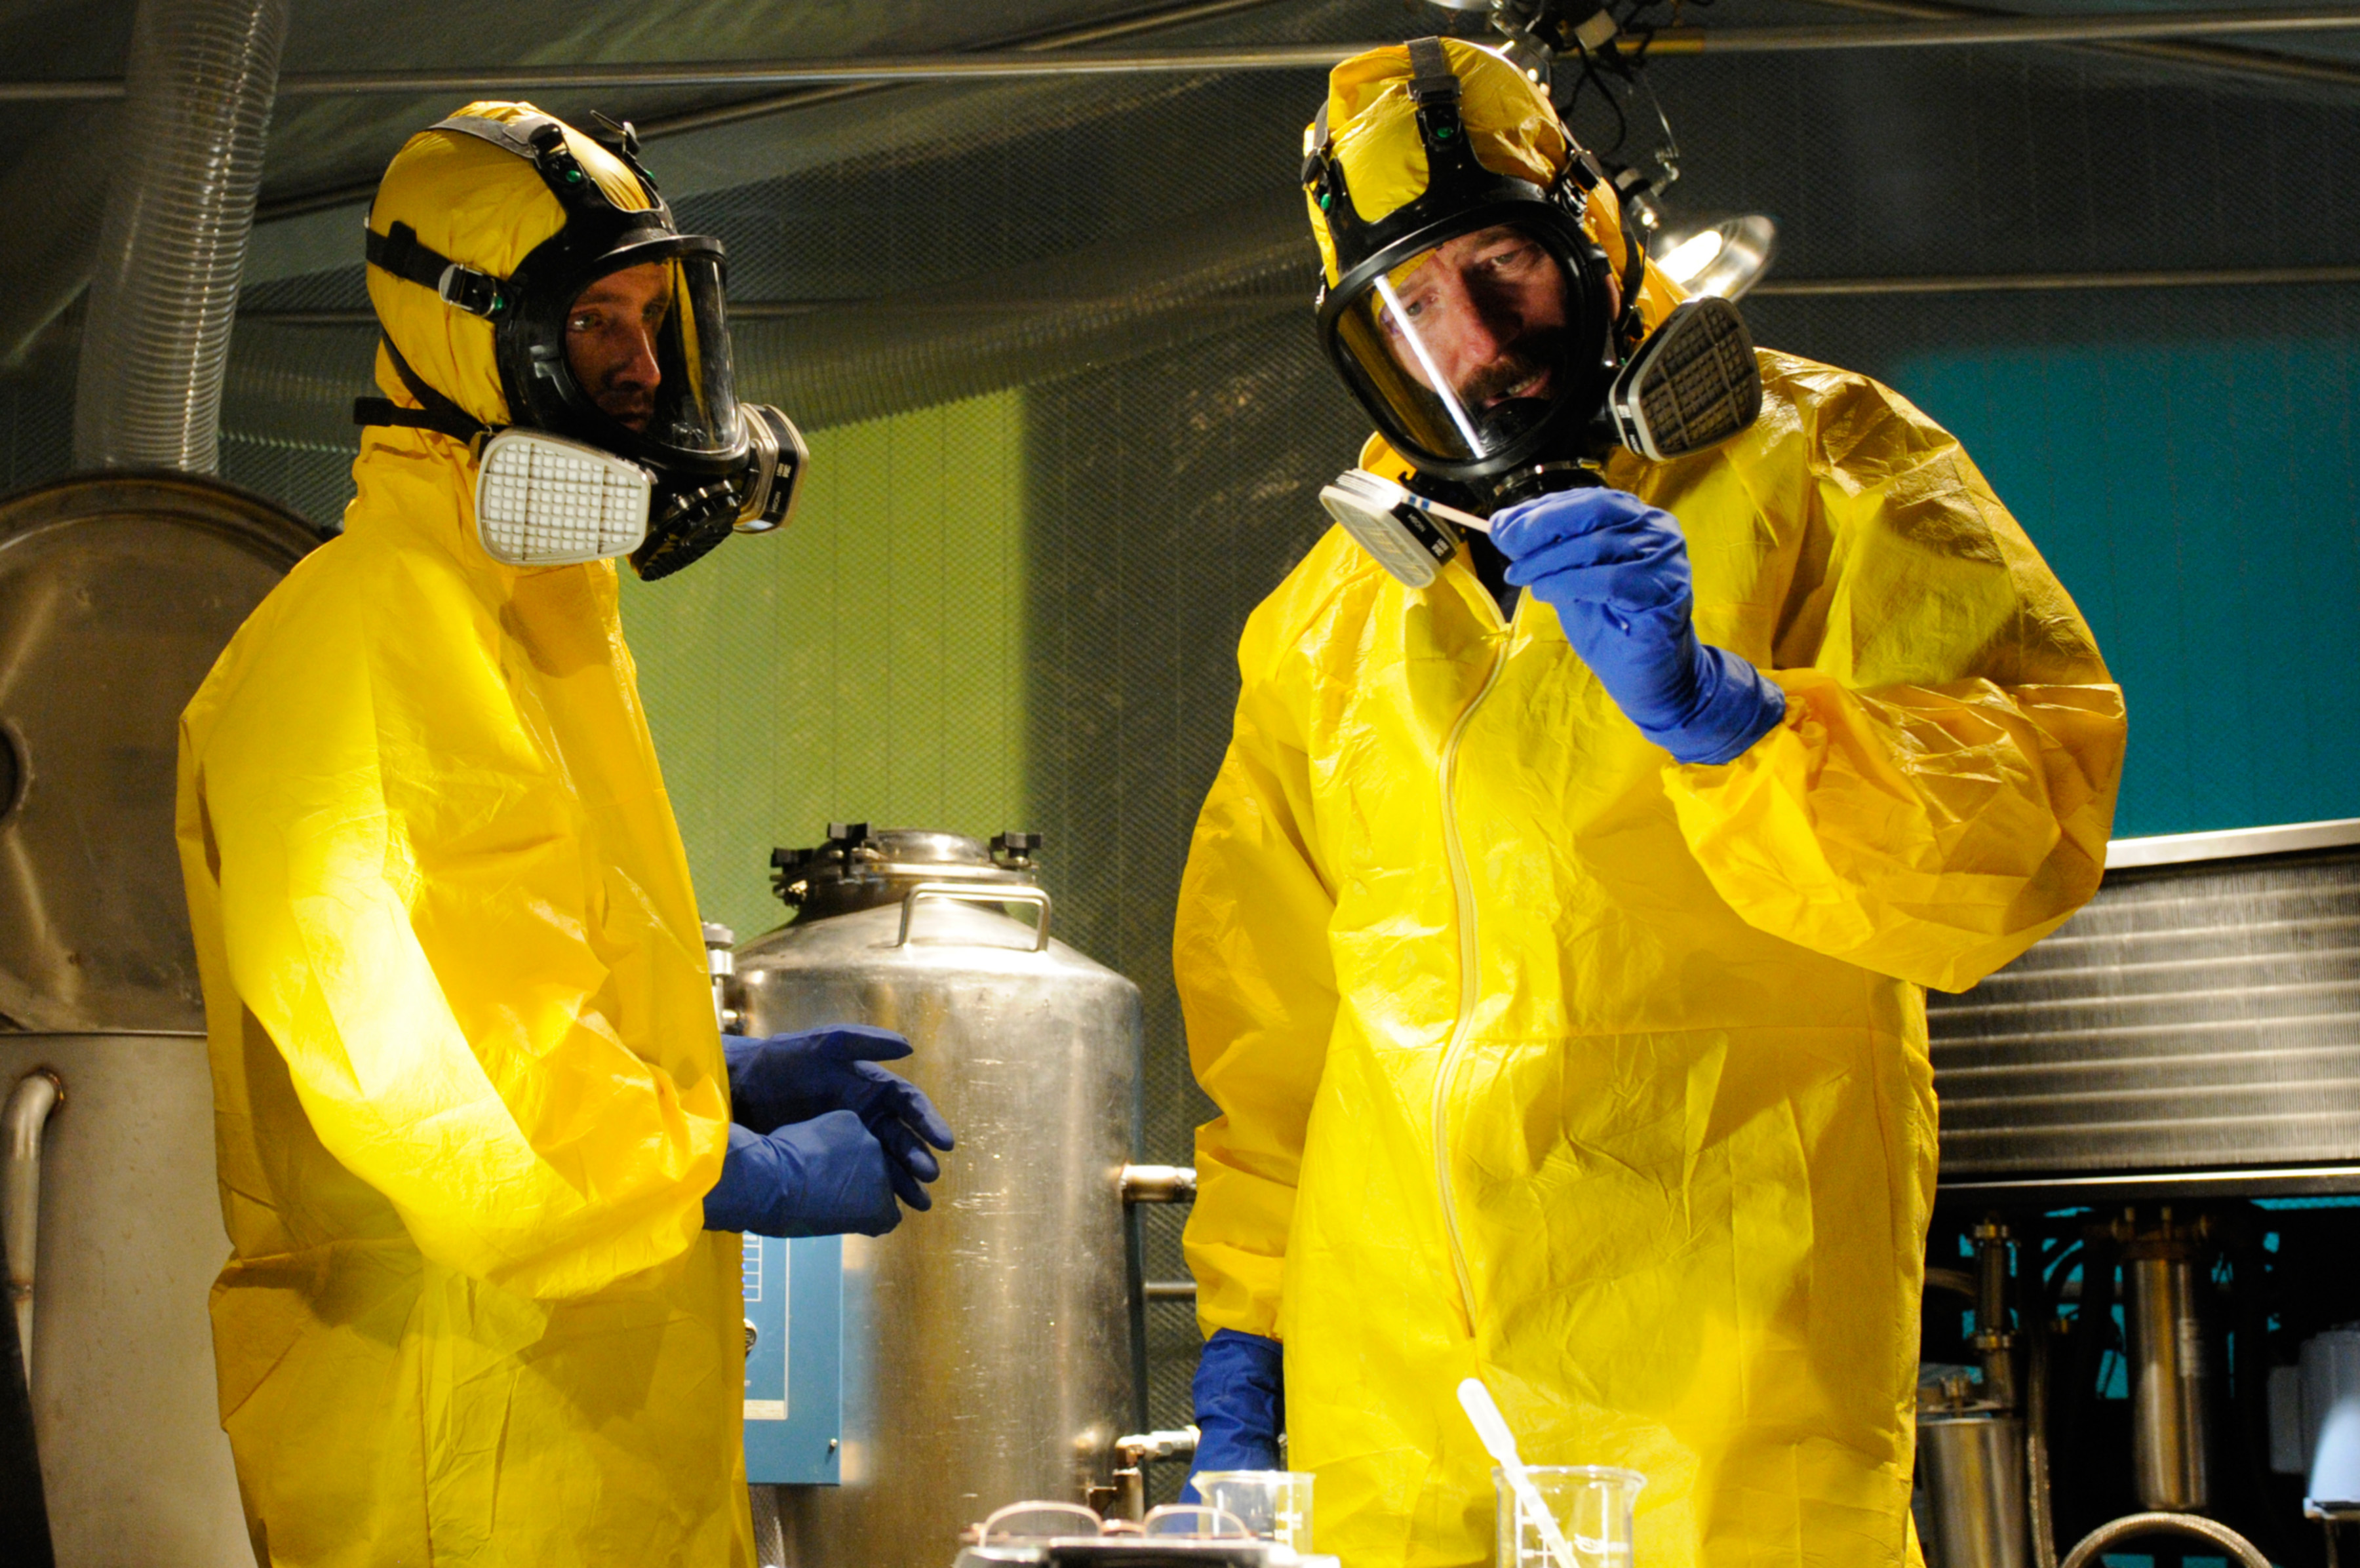 BREAKING BAD, (from left): Aaron Paul, Bryan Cranston, 'Hazard Pay', (Season 5, ep. 503, aired July